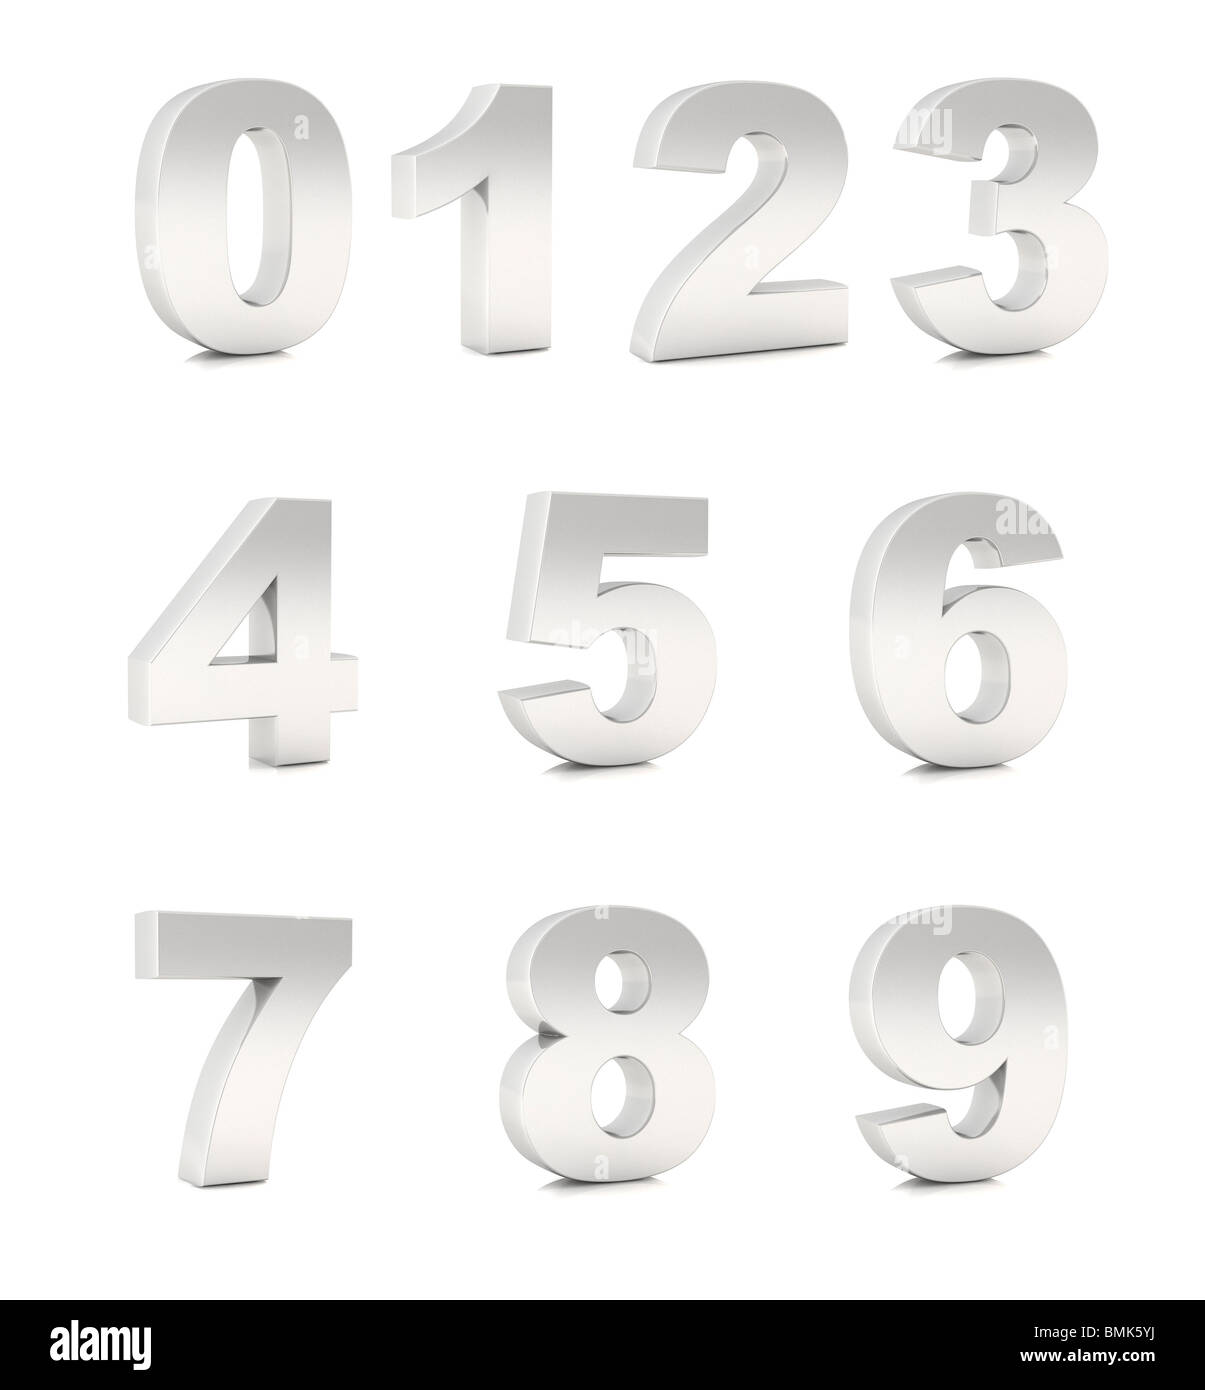 Tridimensional numbers from 0 to 9 chromium silver Stock Photo